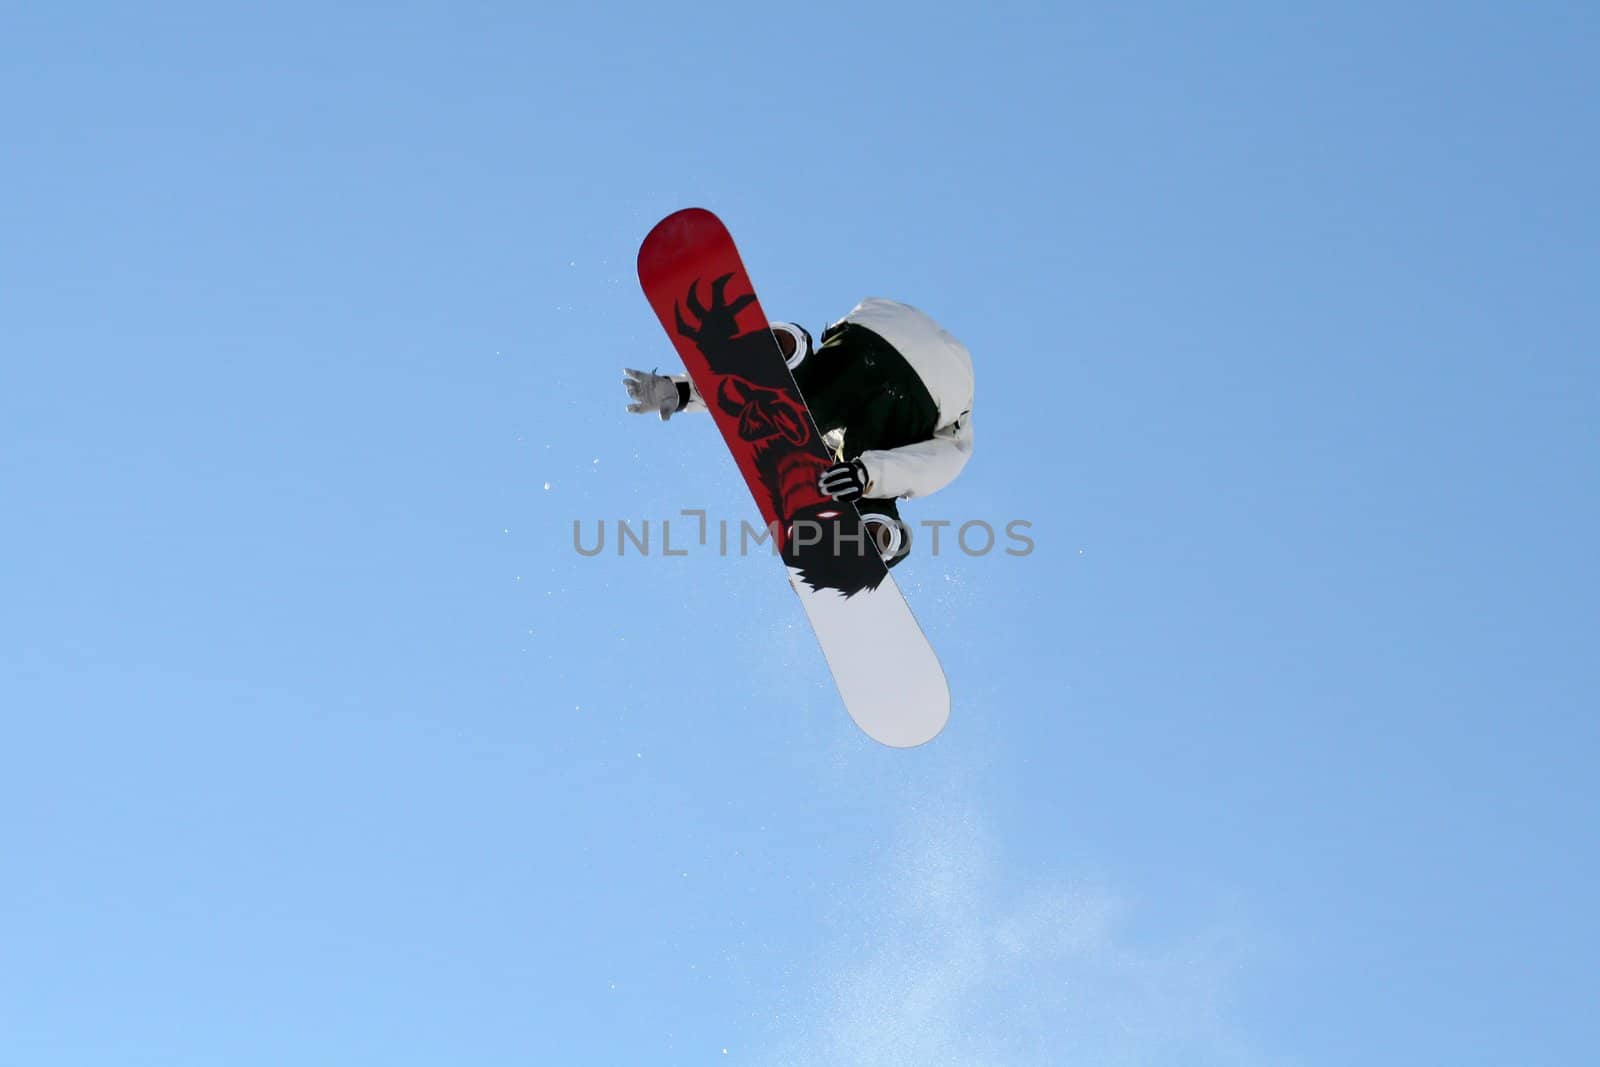 Snowboarder jumping high in the air by monner